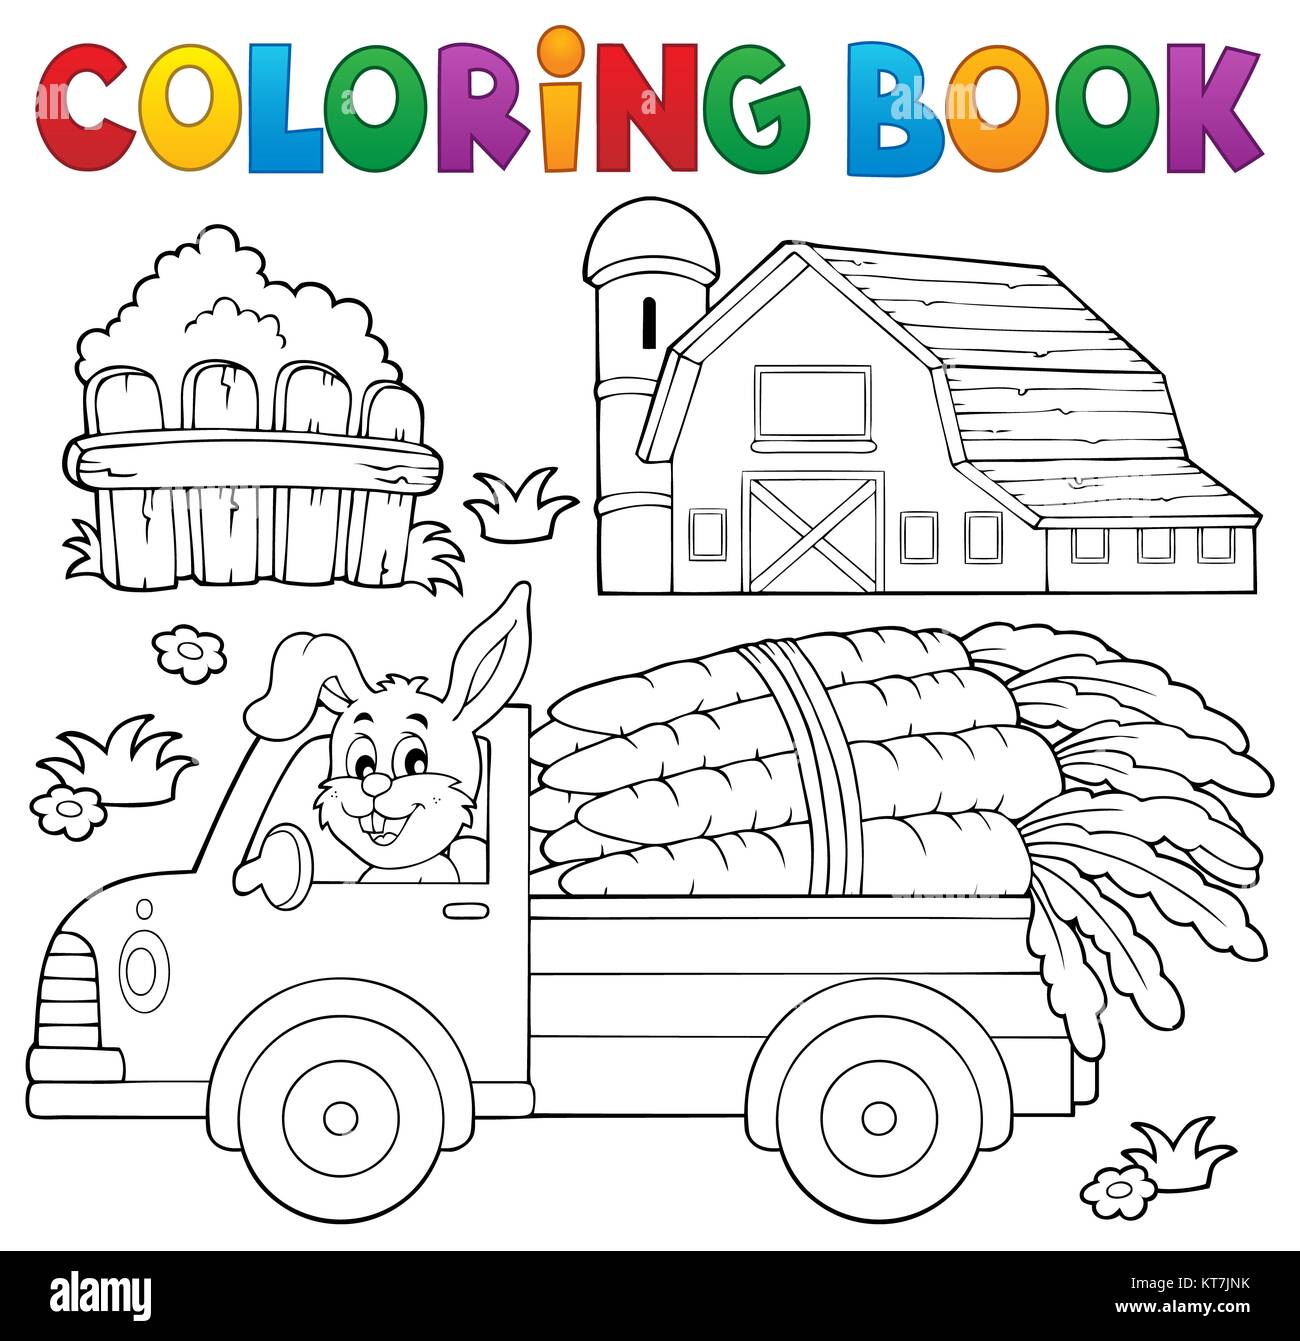 Coloring book farm truck with carrots Stock Photo